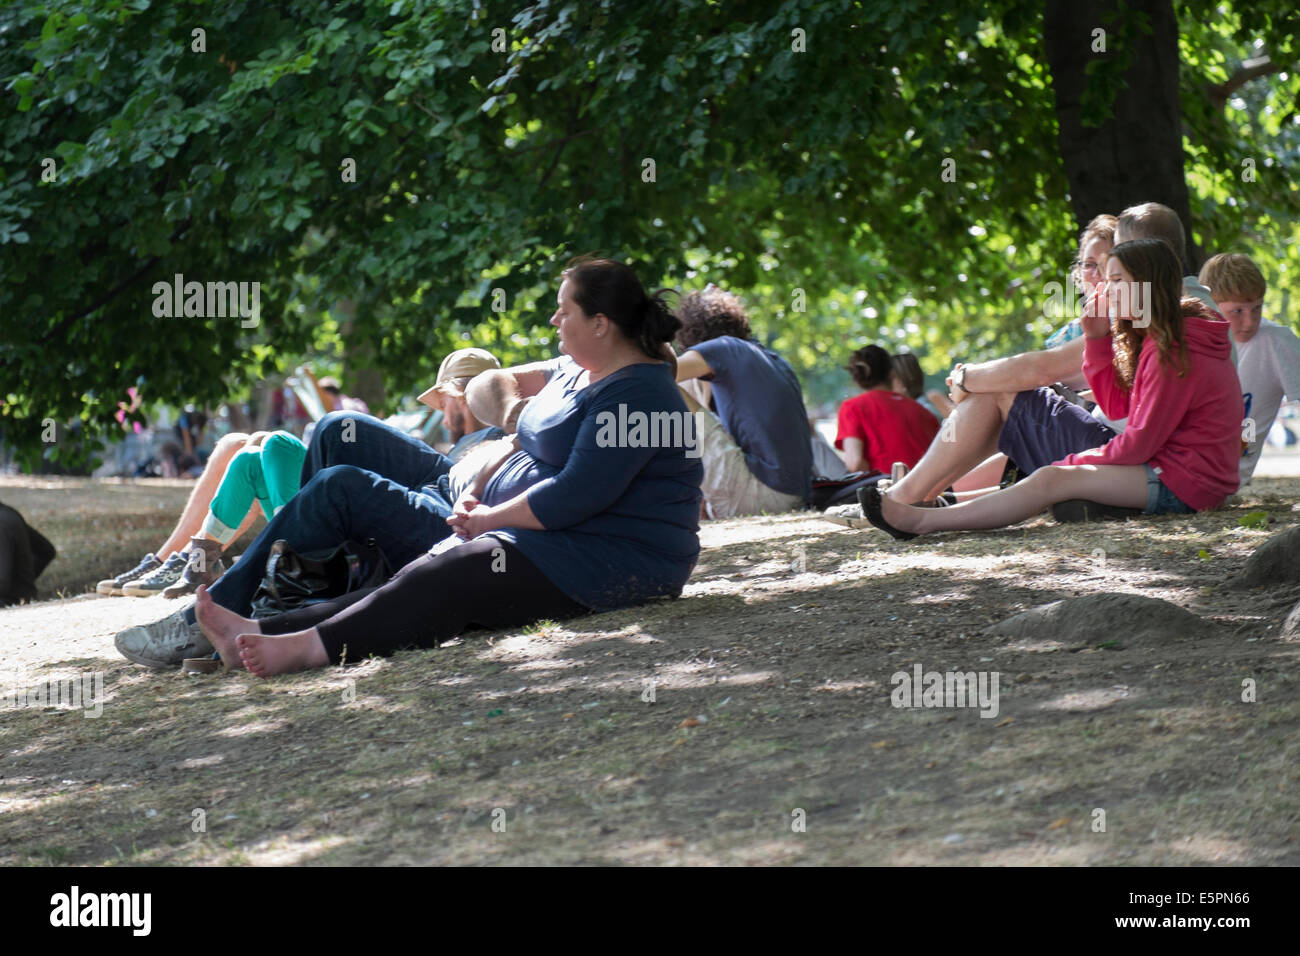 People taking shade during the midday sun in London's St James Park, UK Stock Photo